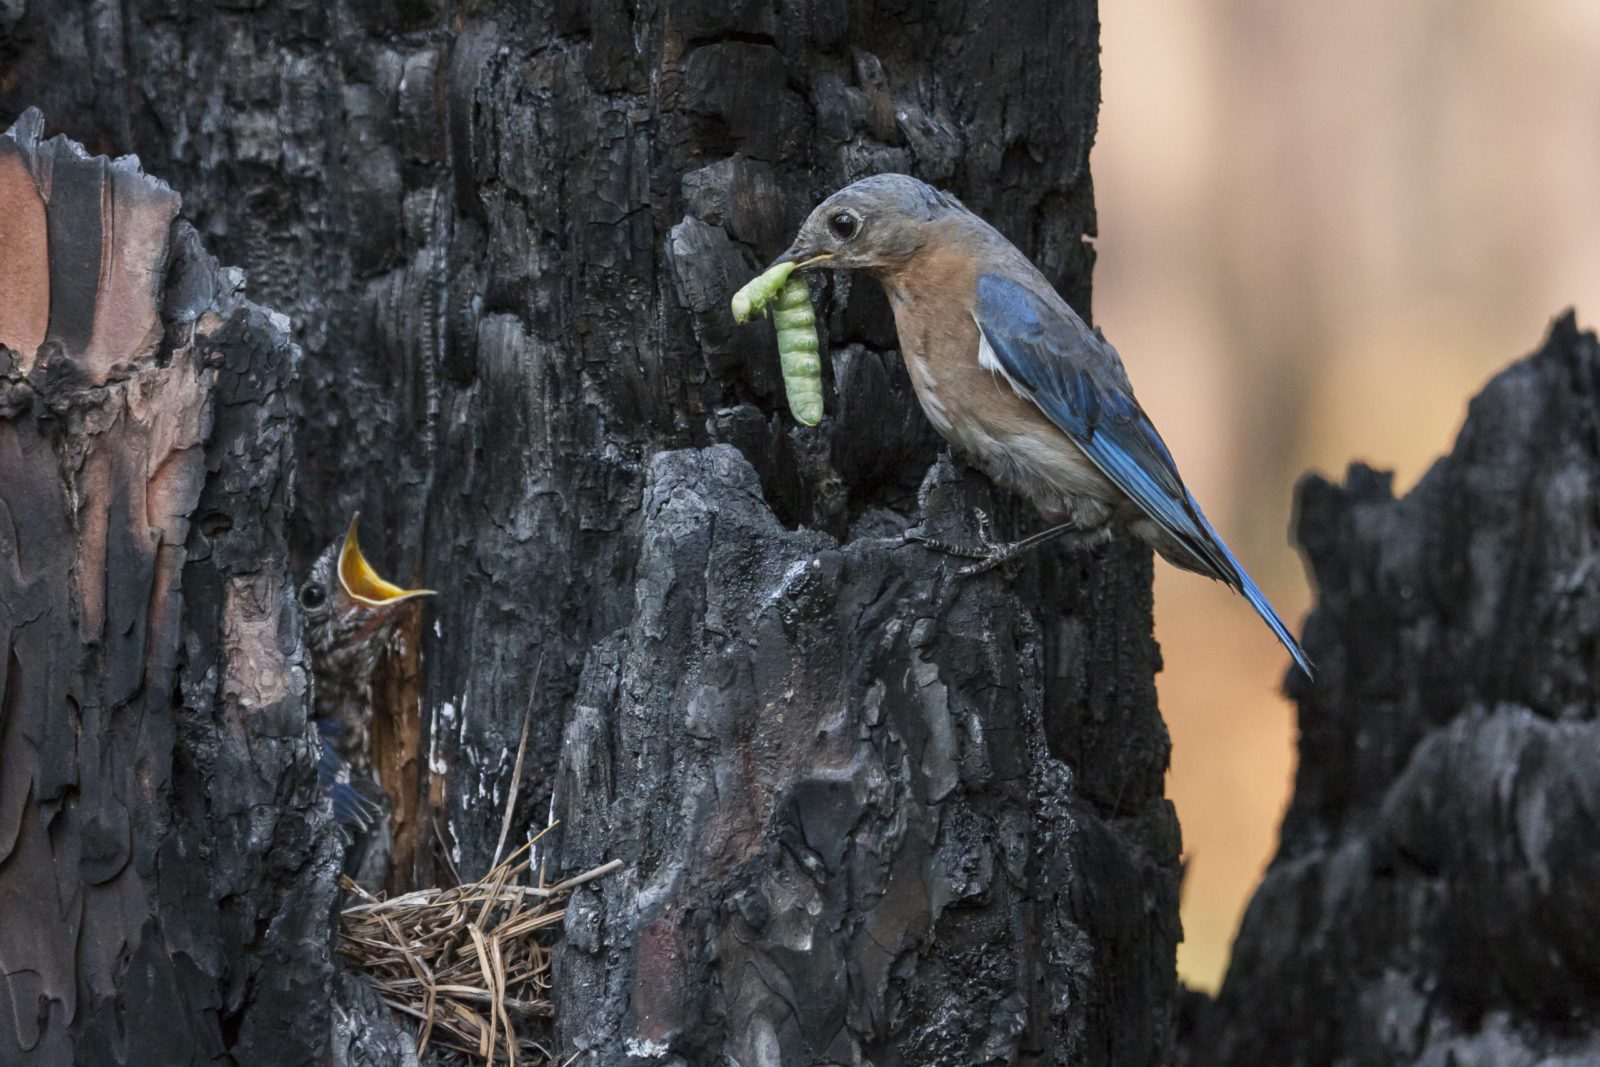 An eastern bluebird feeds young in its charred stump nest cavity. Photo by Brady Beck.